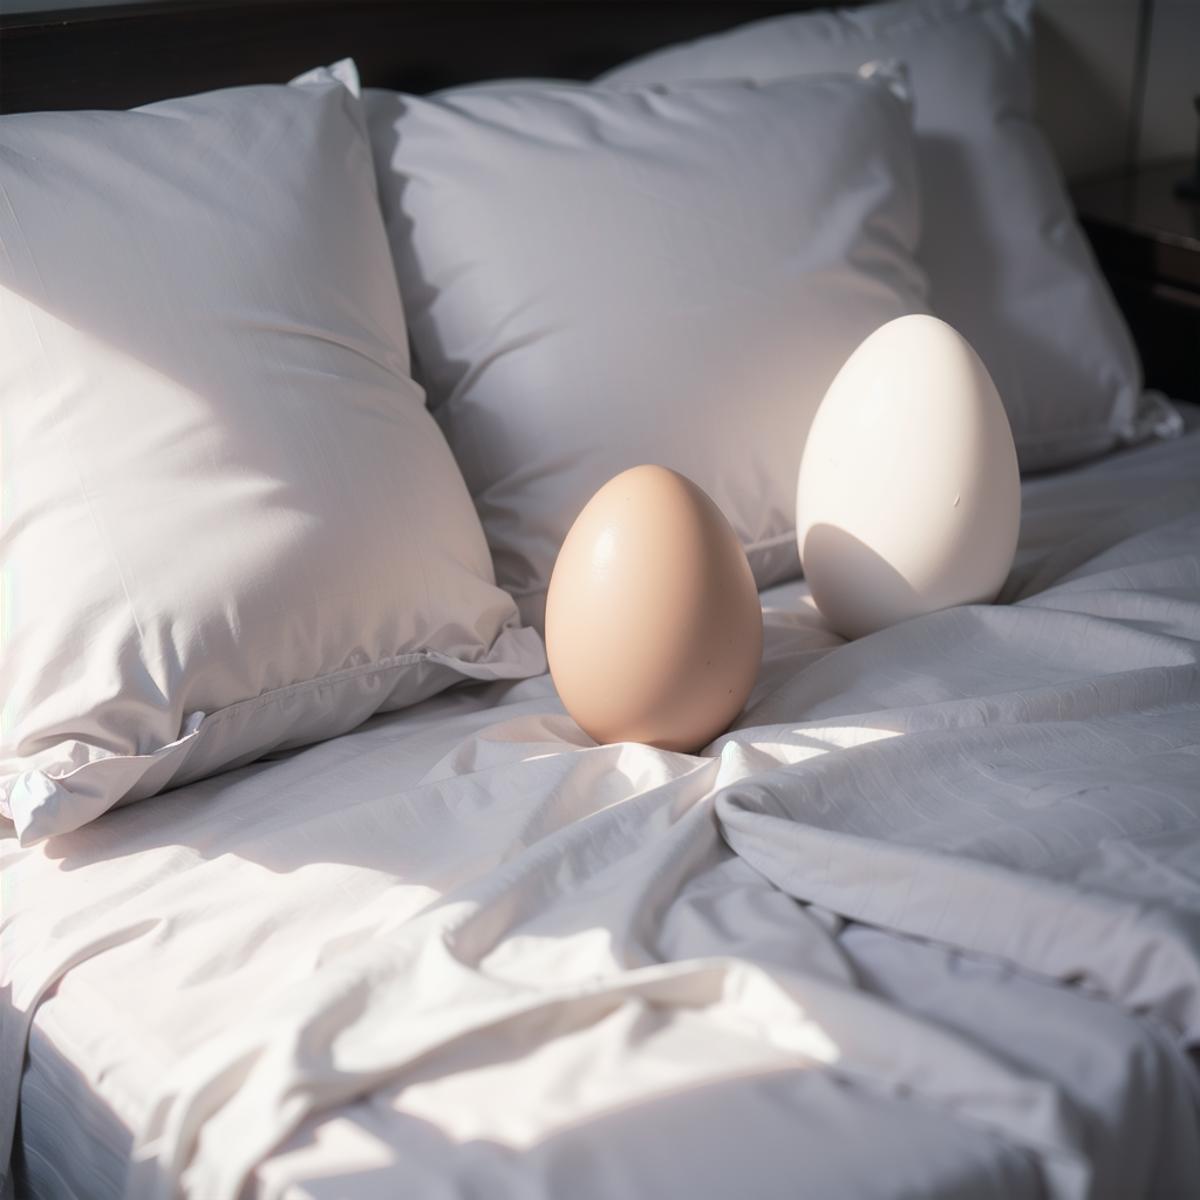 Two Eggs on a Bed: One Is White, One Is Brown